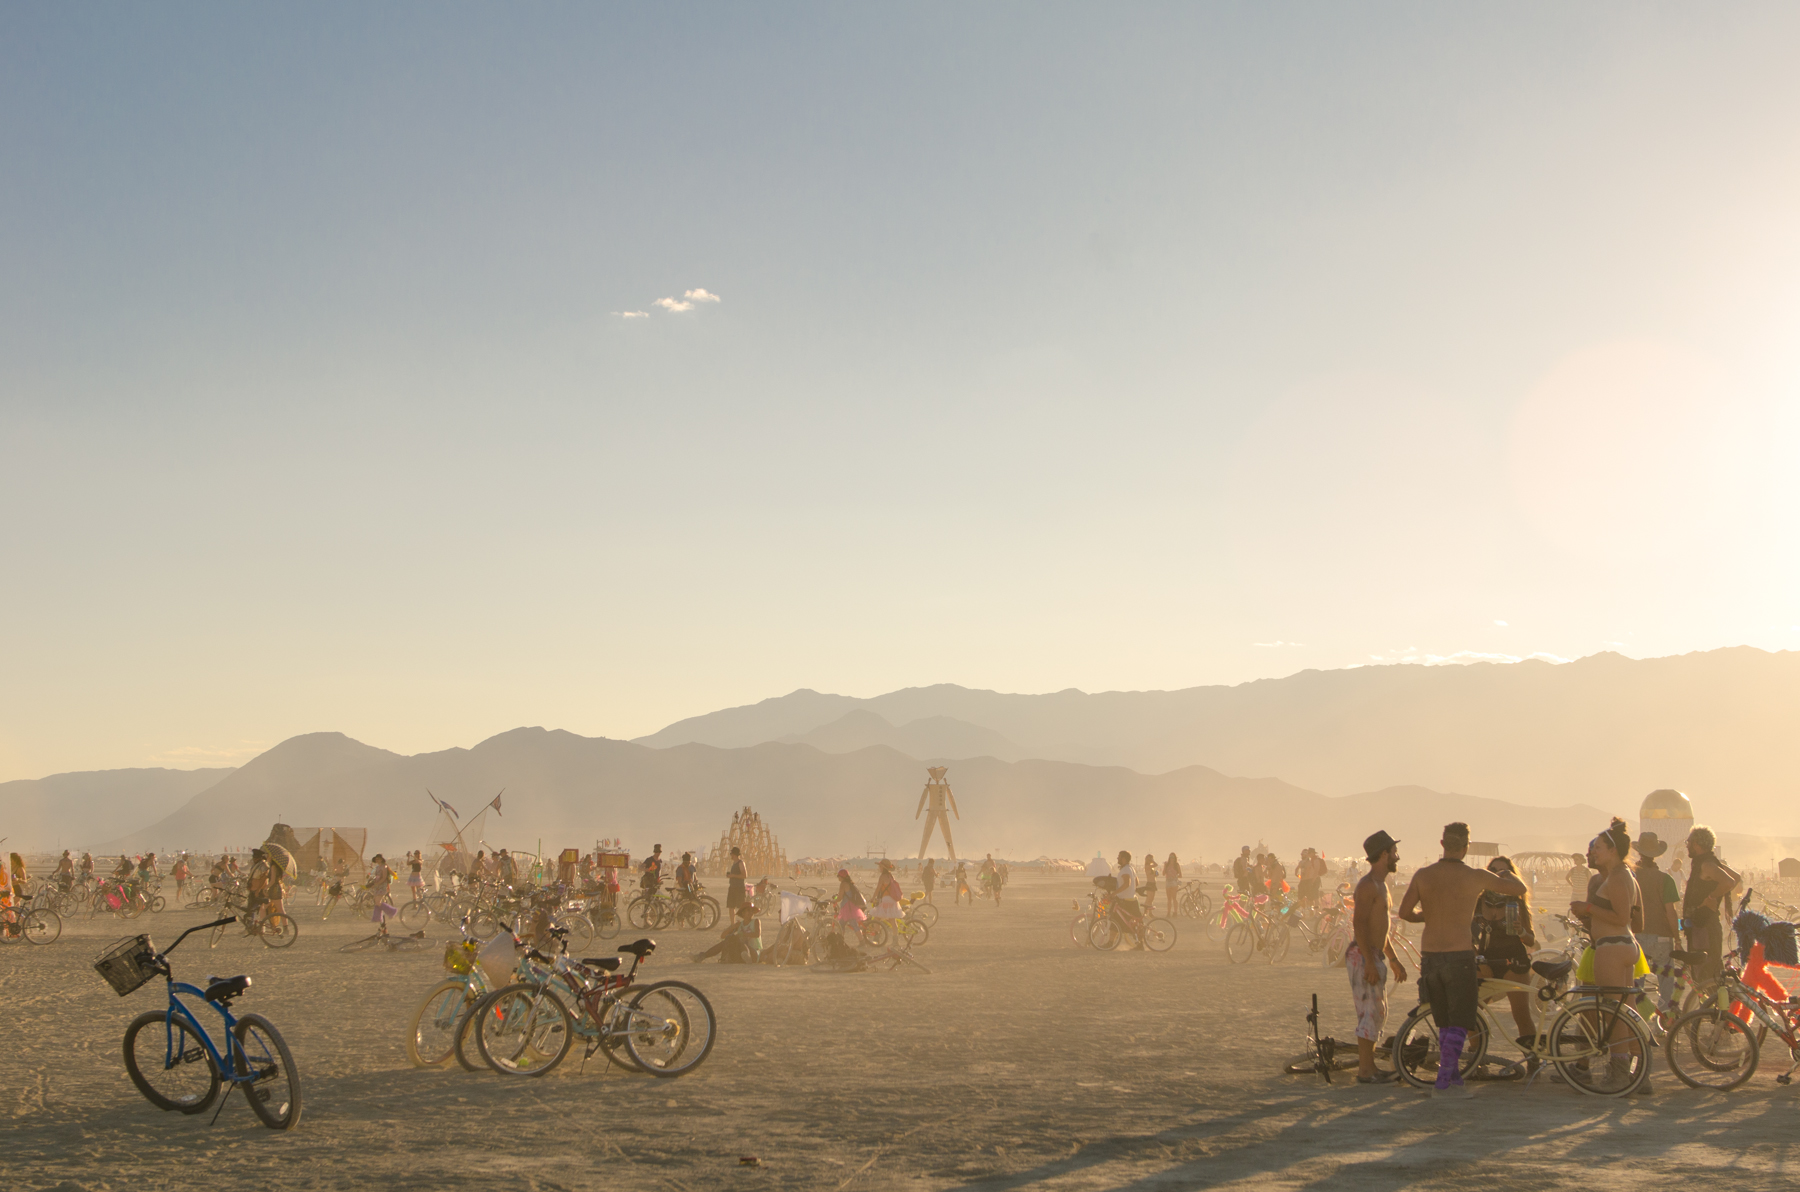 The Playa at sunset: when the dust and golden light combine to create something truly magical that's over in less than an hour.